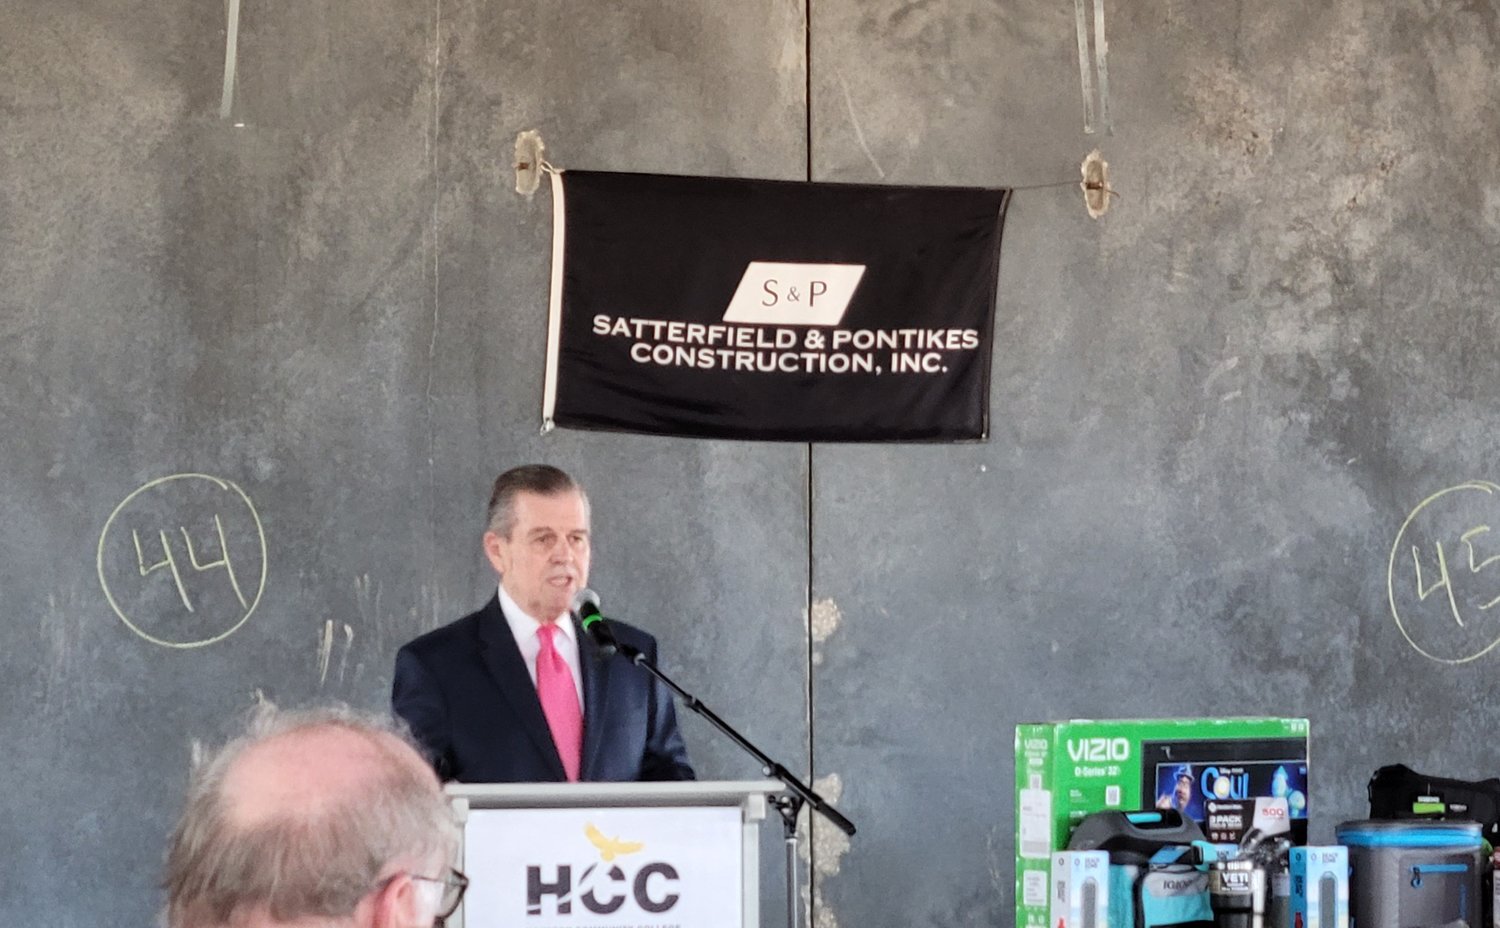 HCC Norwestern College President Zachary Hodges speaks at the new HCC Katy campus's topping out ceremony. Hodges said the new campus will help the Katy area develop a workforce that will help bolster the local economy.